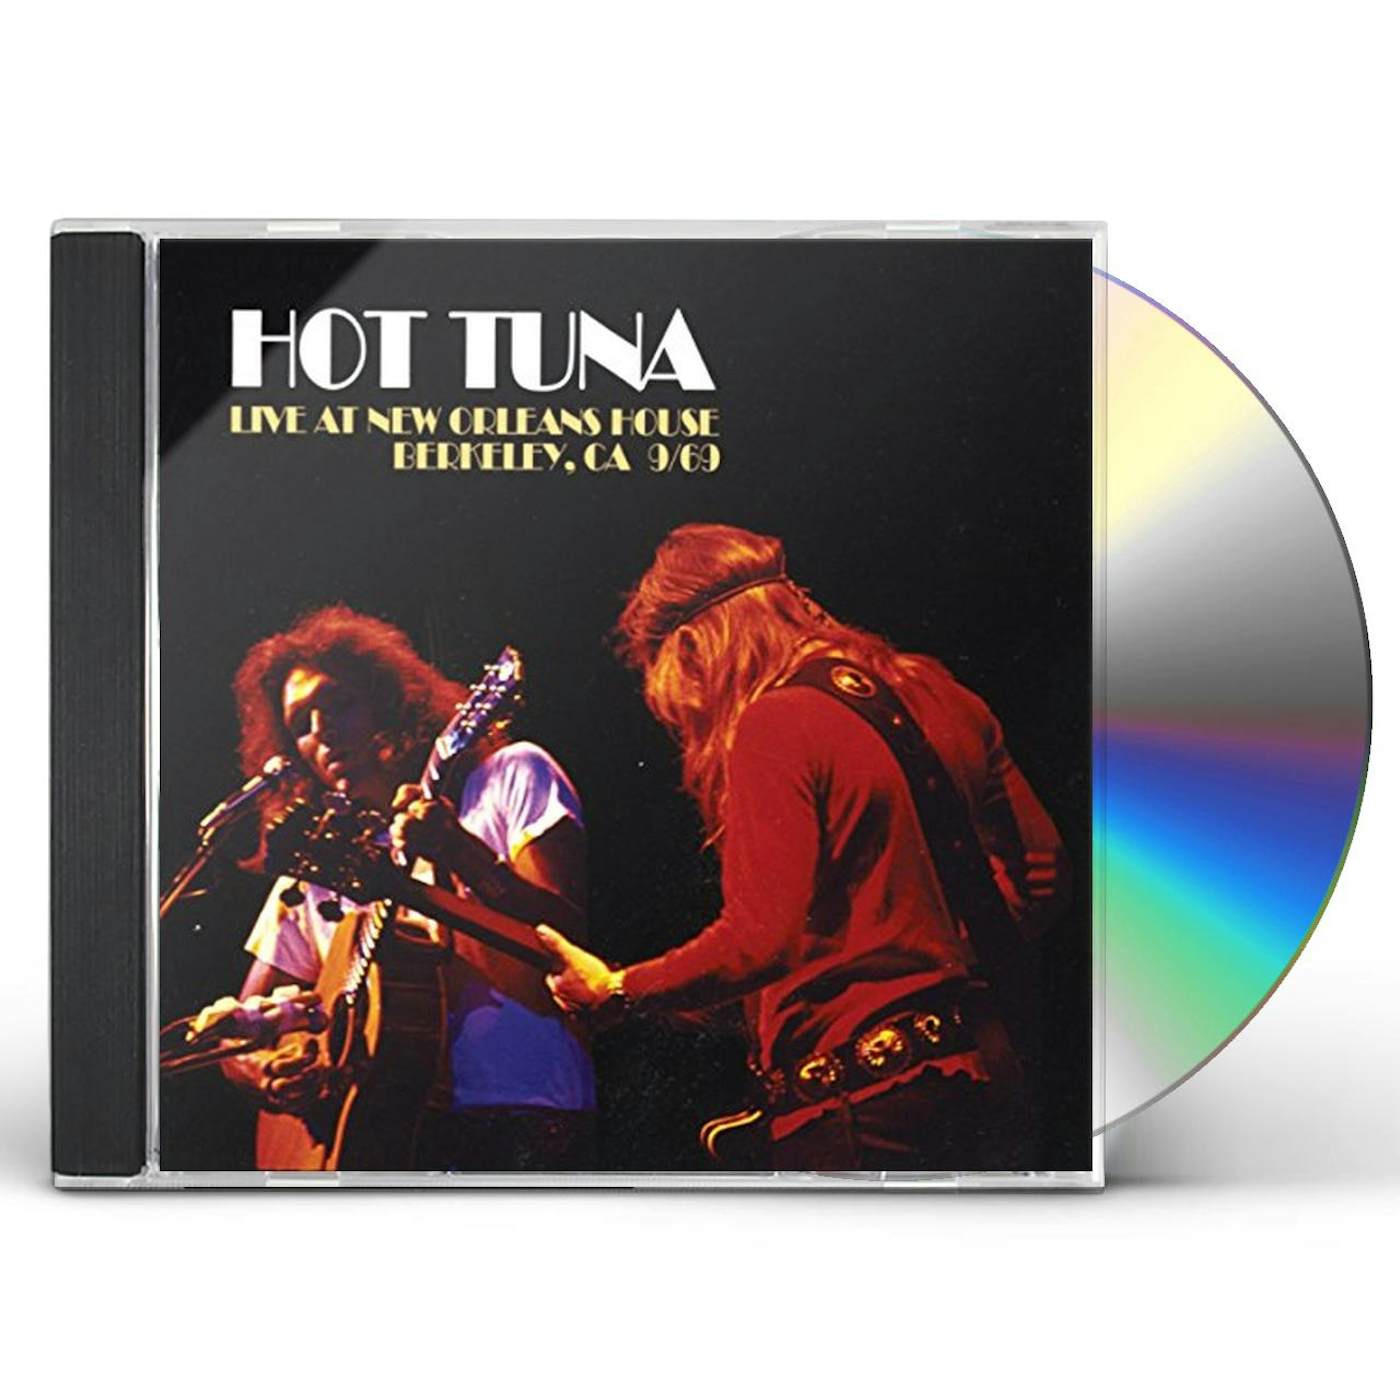 Hot Tuna LIVE AT NEW ORLEANS HOUSE CD